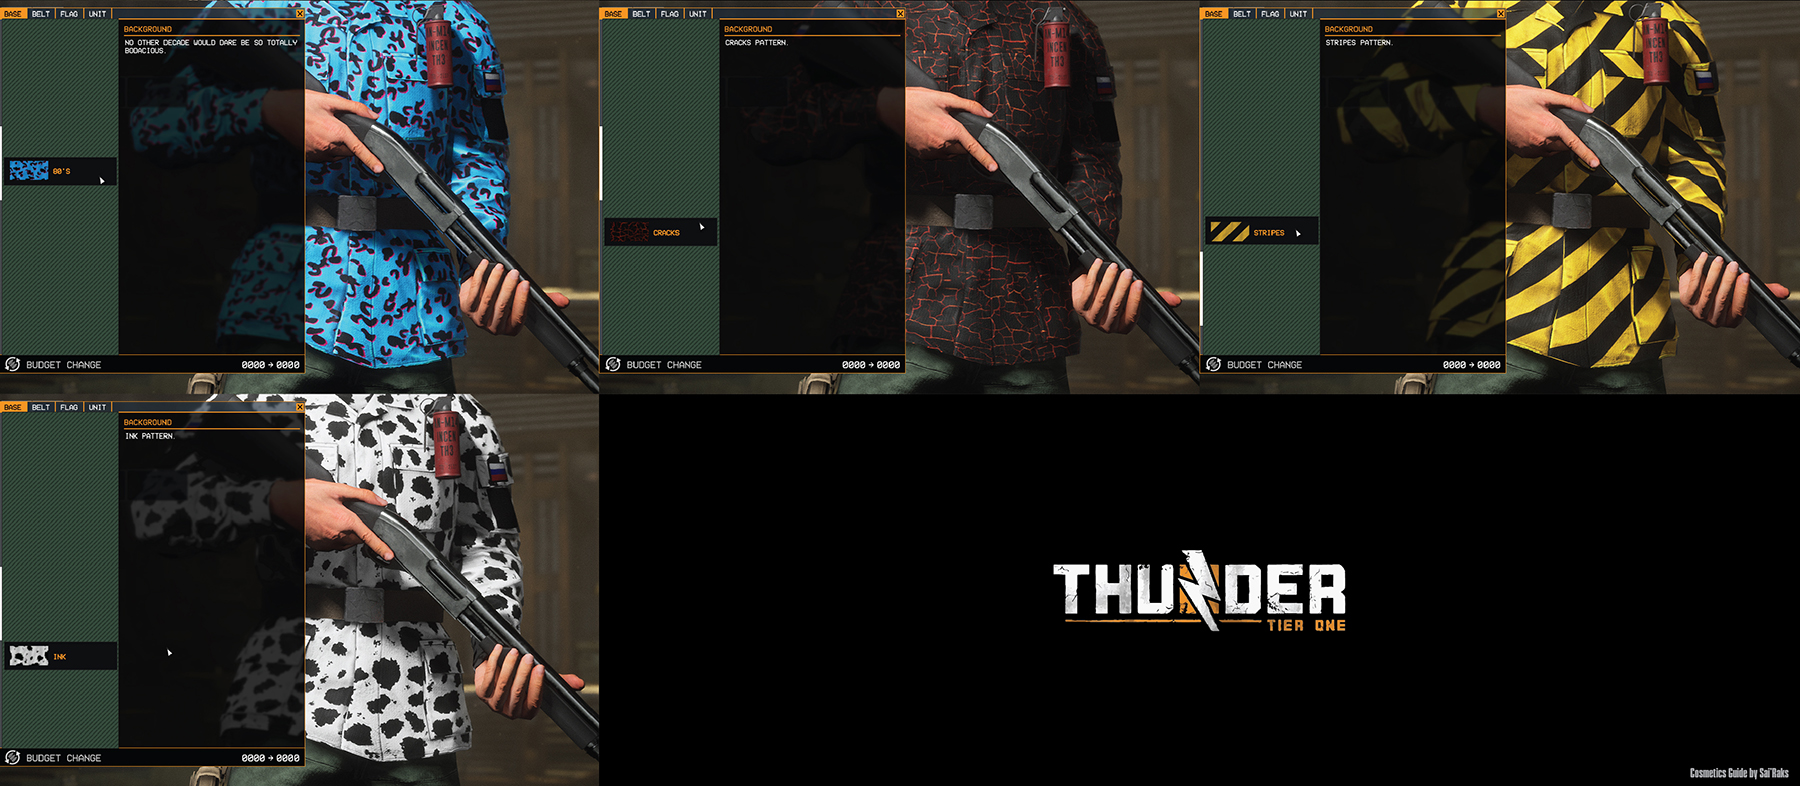 Thunder Tier One - How to Unlock All Costumes Guide - Camos, colors - 946294C